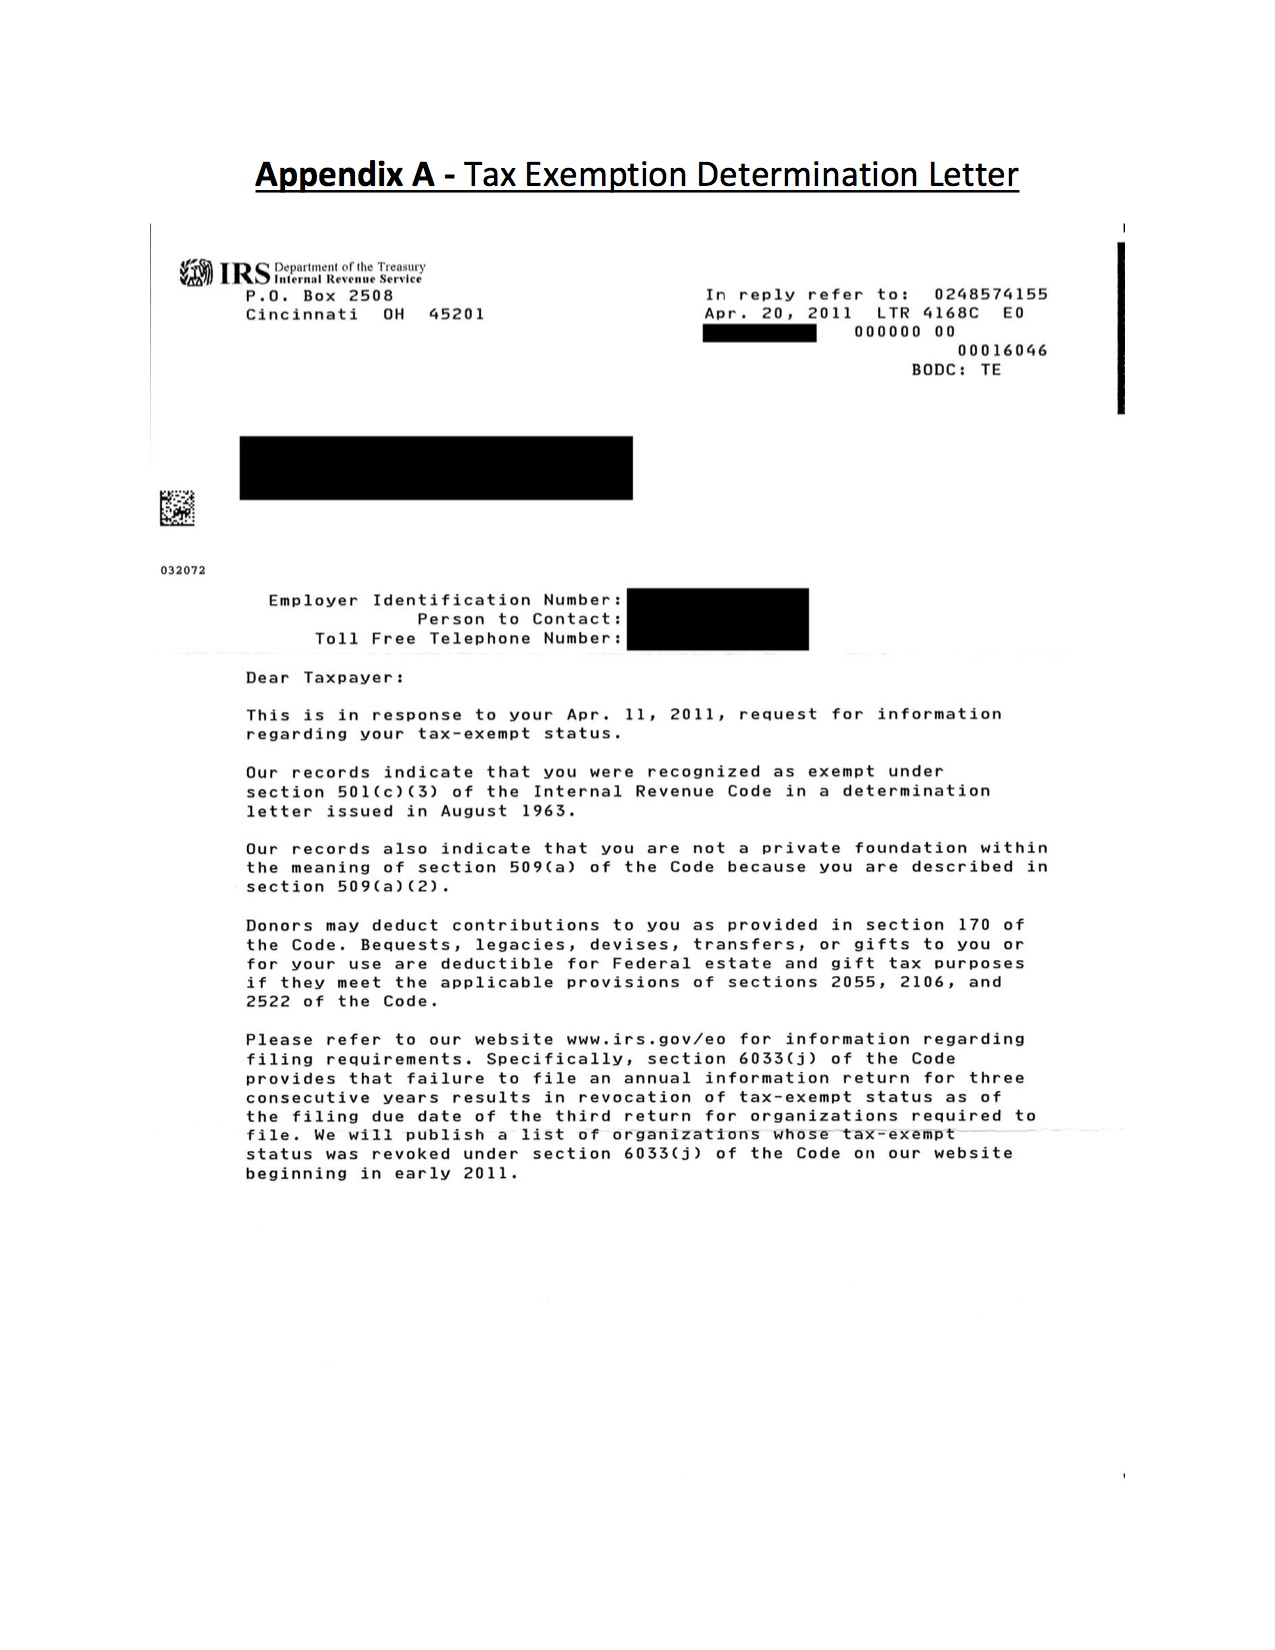 IRS_Tax_Exempt_Letter-Examples.jpg